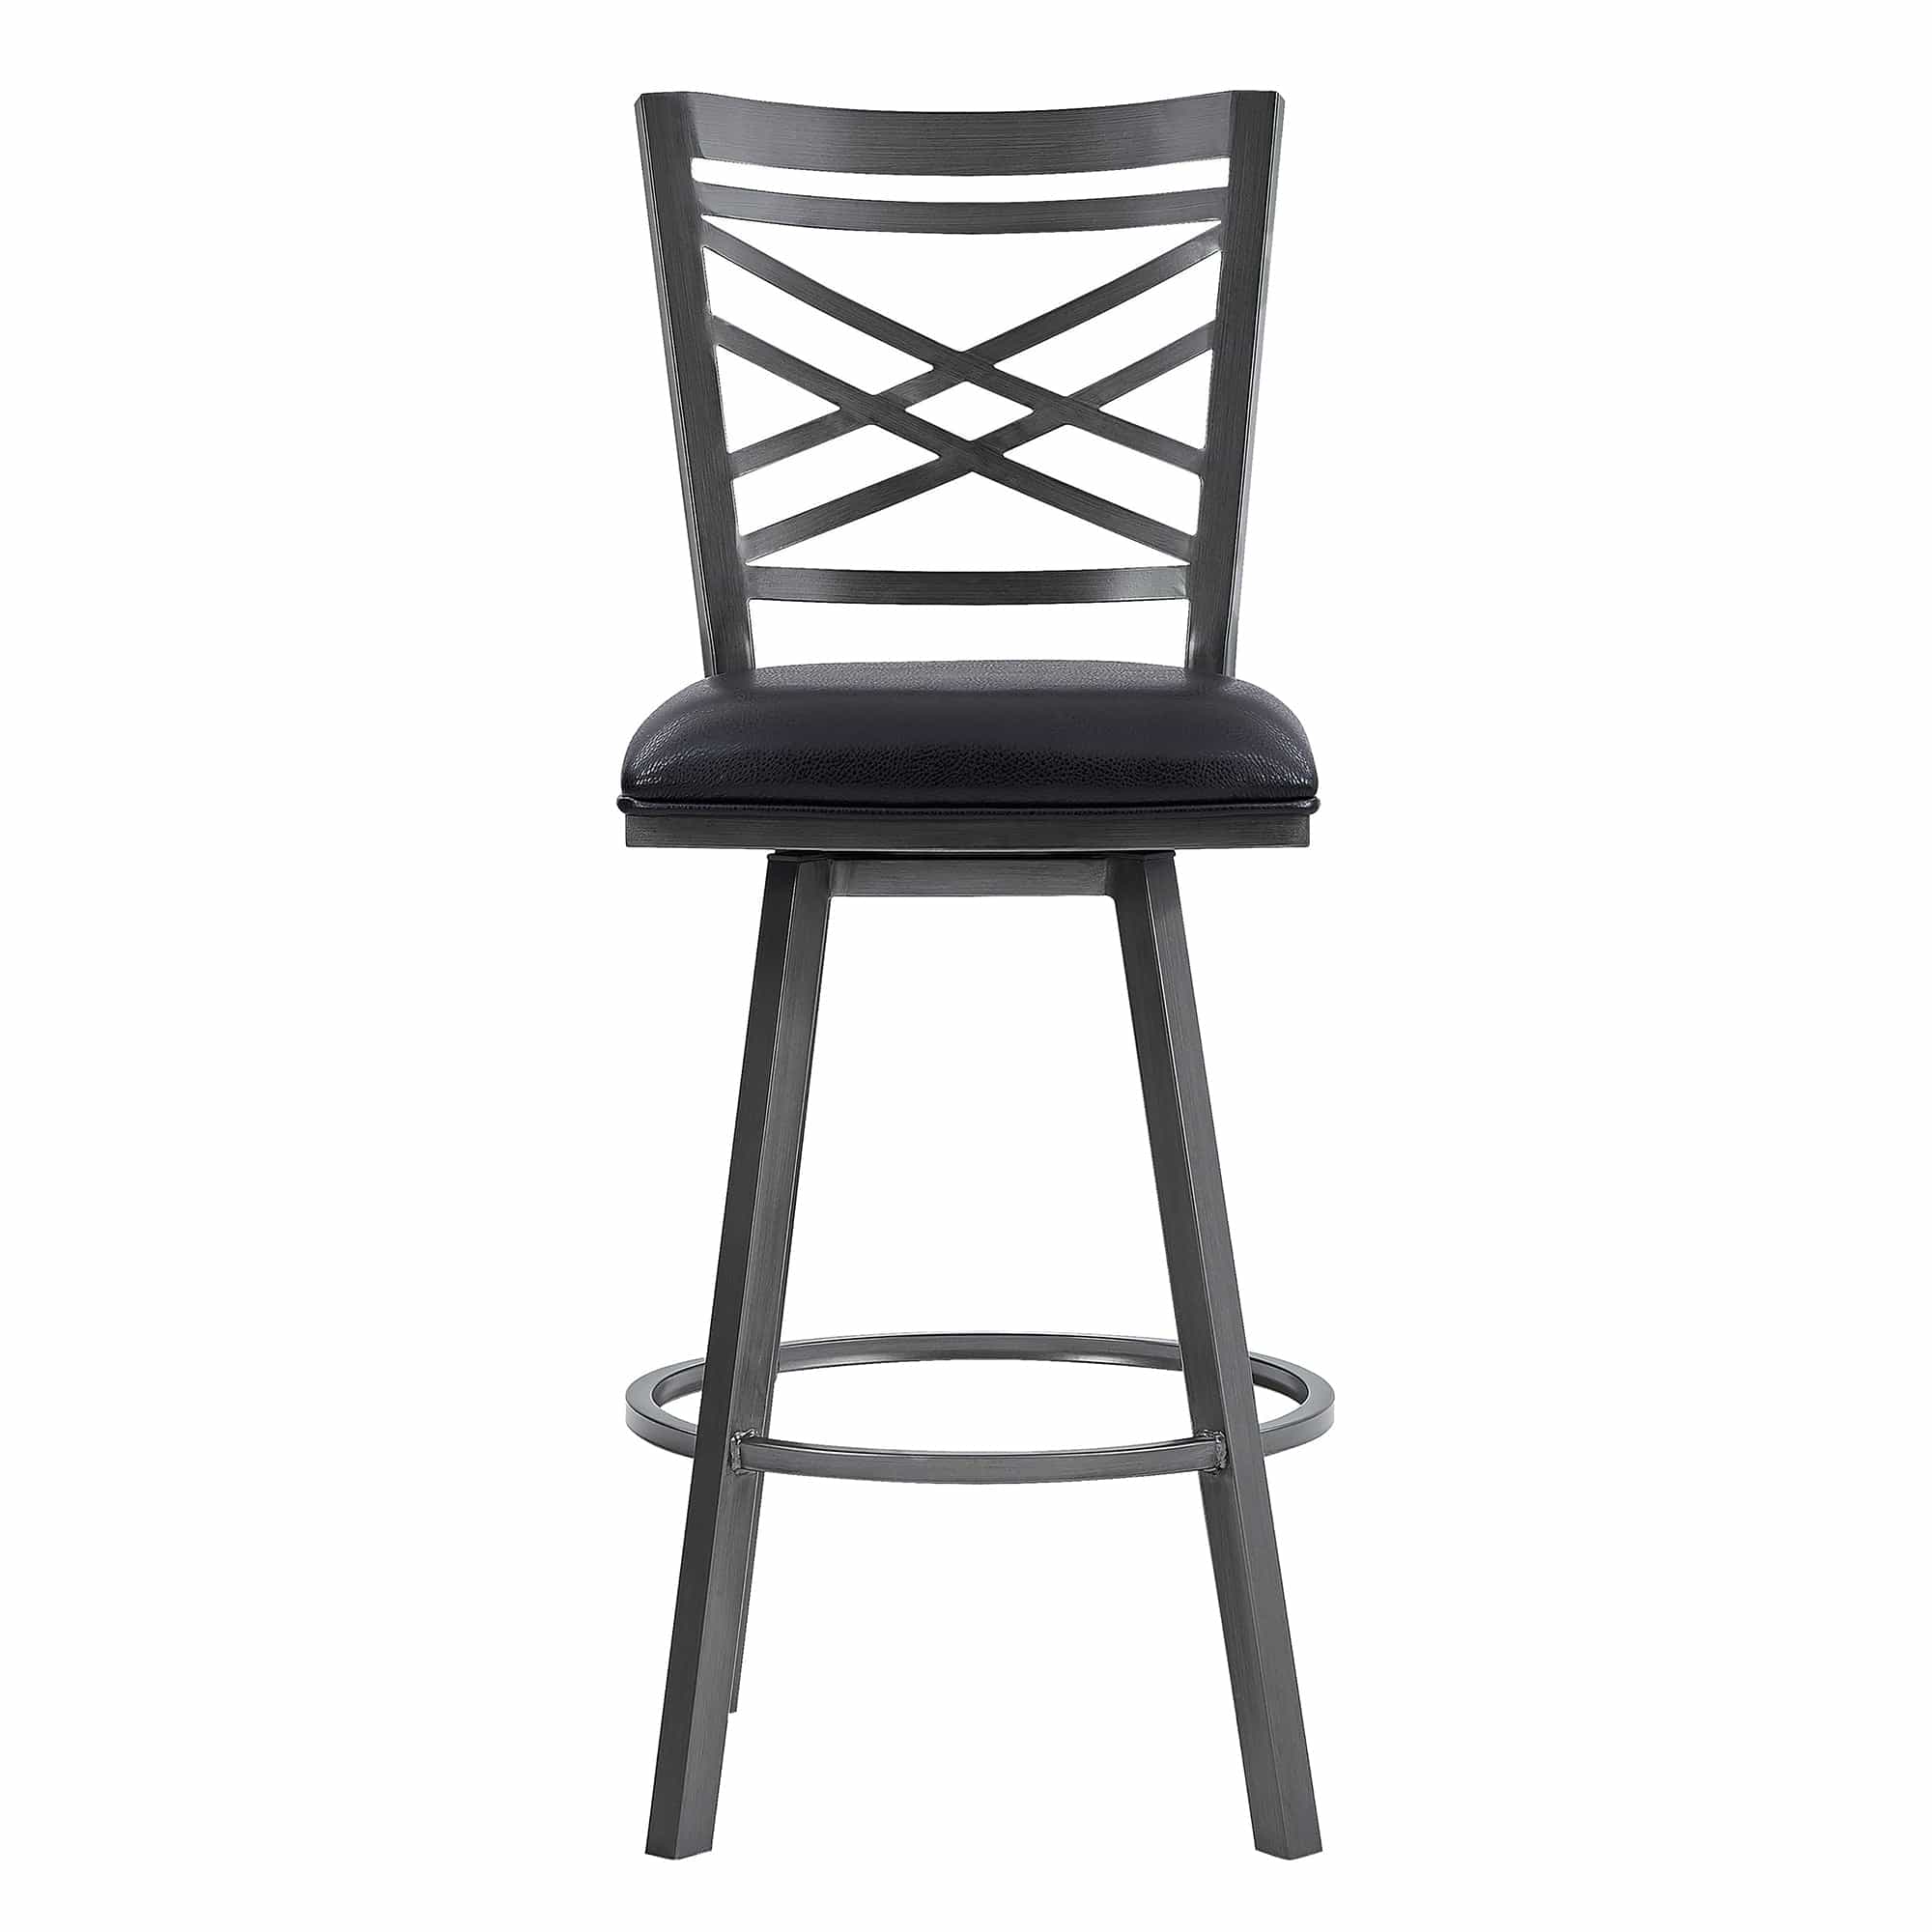 Armen Living Barstool Armen Living | Fargo 26" Counter Height Metal Barstool in Mineral Finish with Black Faux Leather | LCFA26BAMFBL